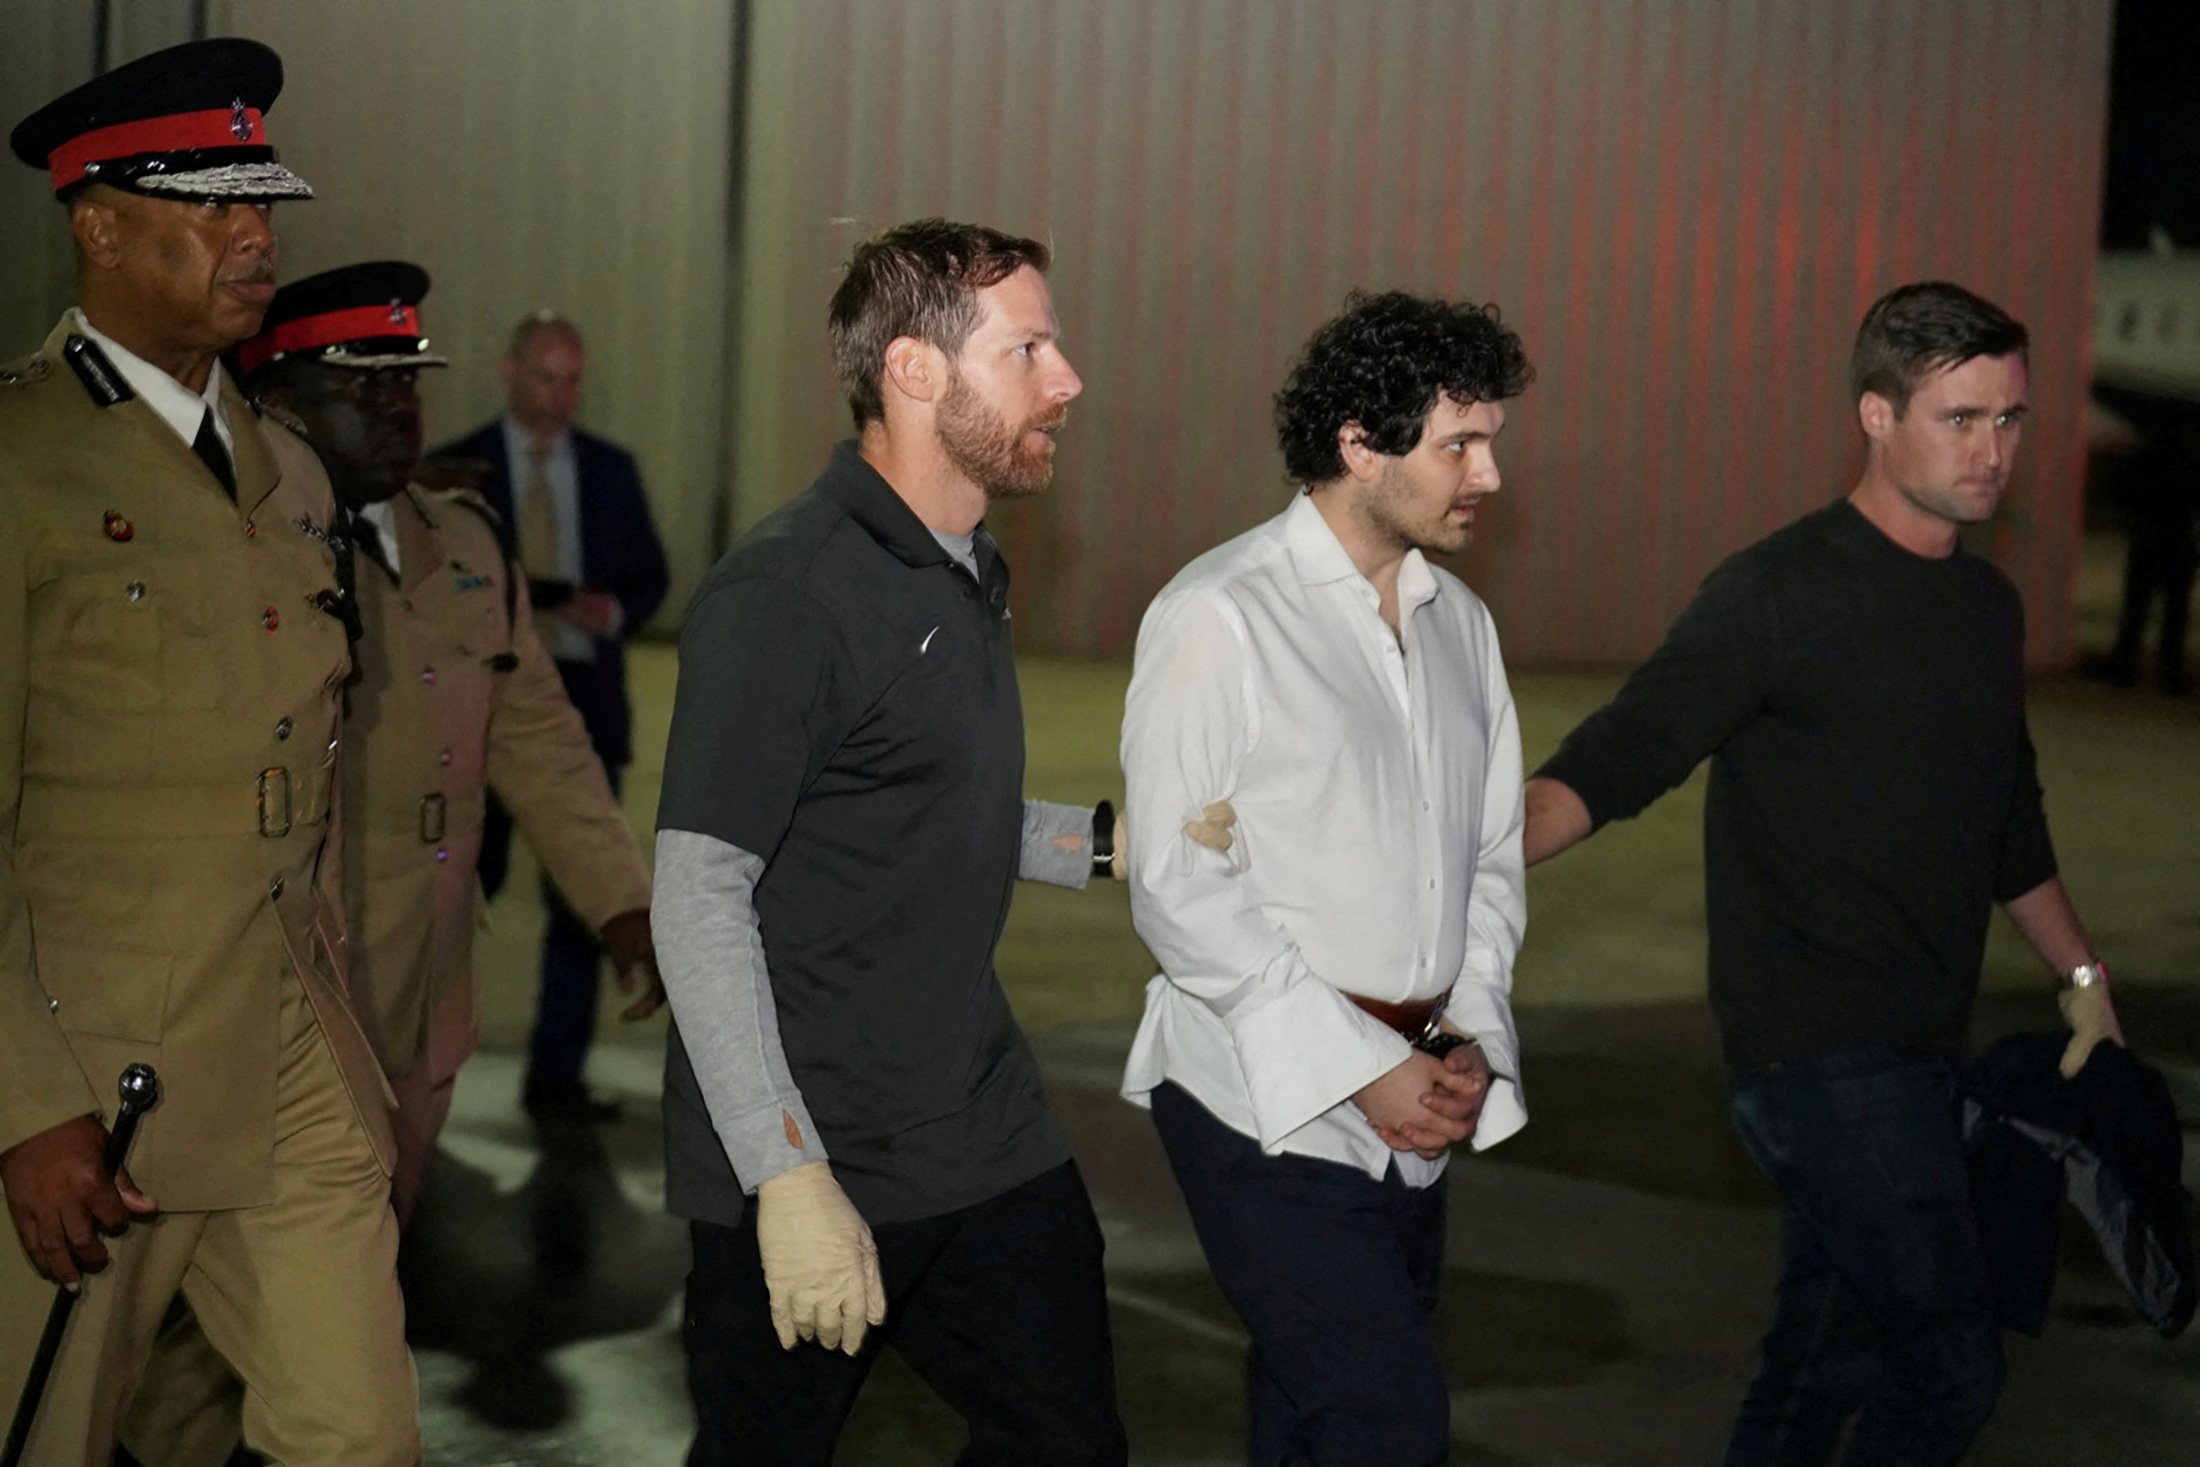 PHOTO: Sam Bankman-Fried, founder and former CEO of crypto currency exchange FTX, is walked in handcuffs to a plane during his extradition to the United States at Lynden Pindling international airport in Nassau, Bahamas, Dec. 21, 2022.